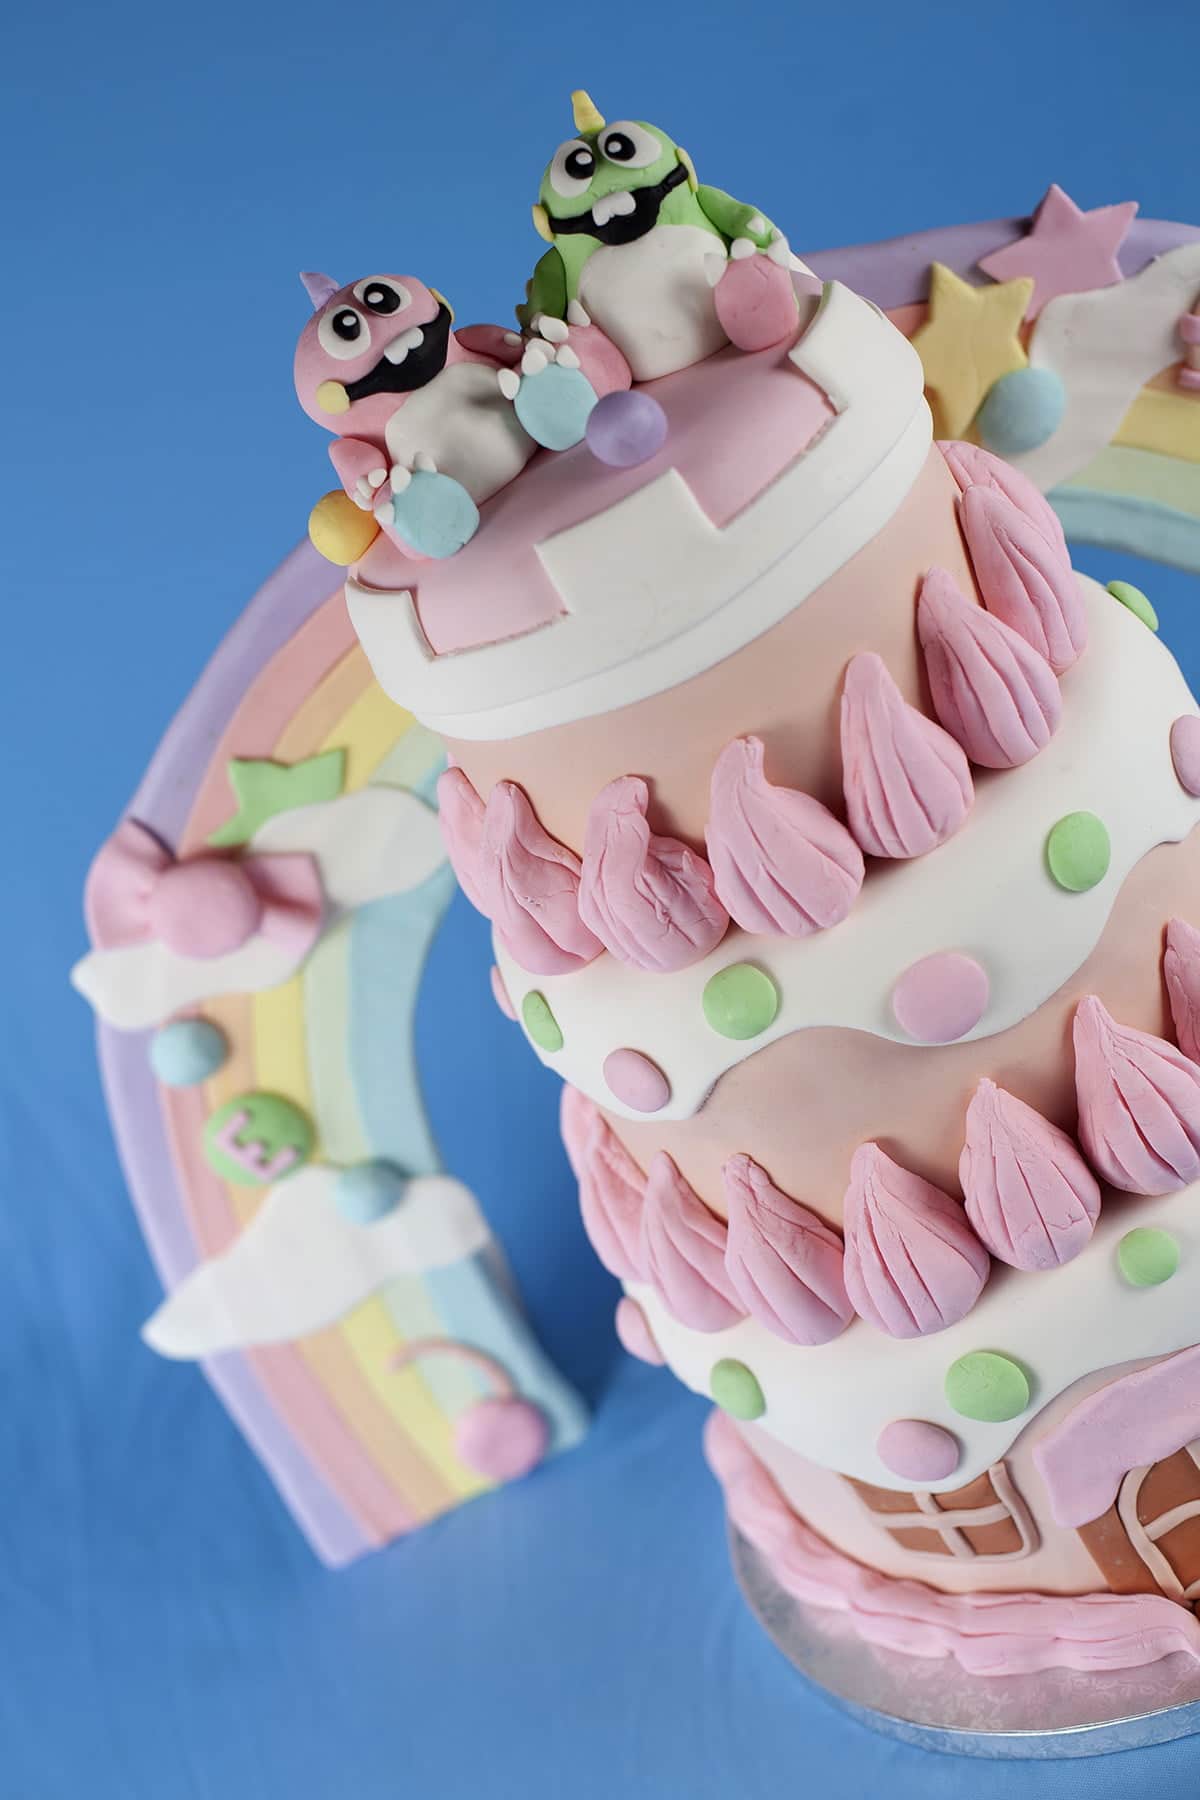 Detailed shots of a Bubble Bobble themed wedding cake. It's 3 tiers of pinks, whites, and pastel colours, "candy", cartoon dinosaurs, and more.